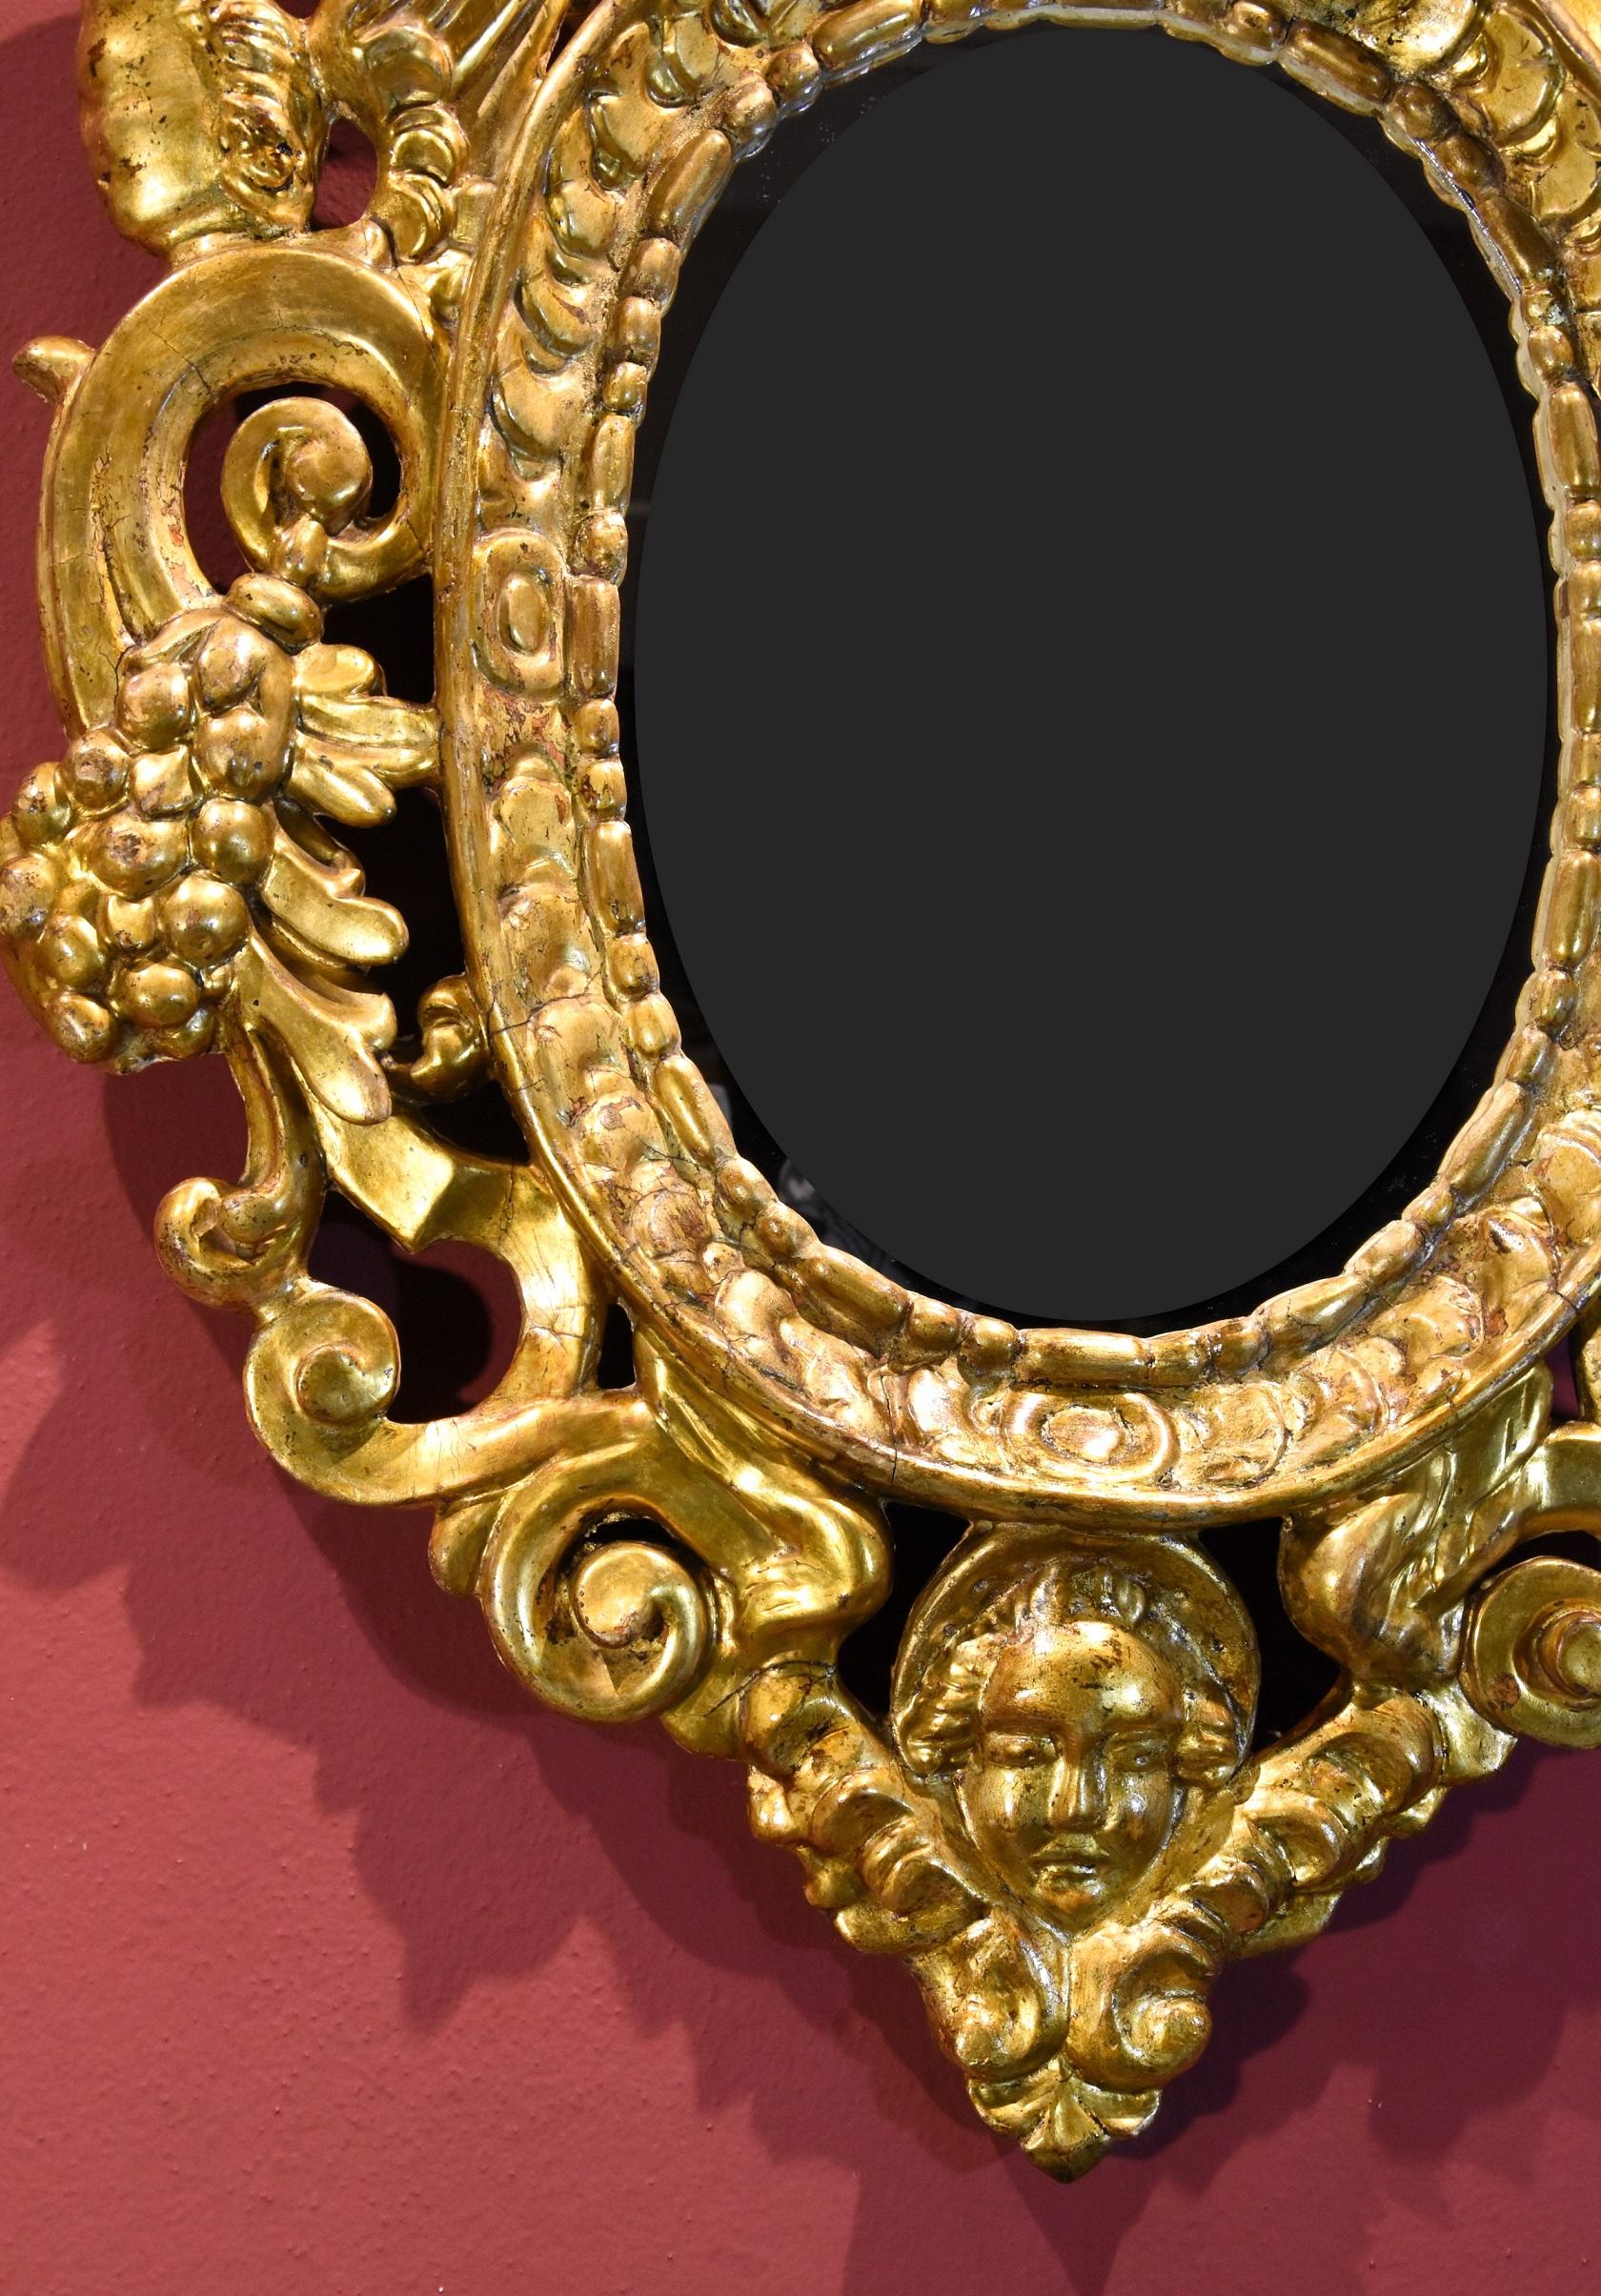 Pair Carved Gilded Mirrors Gold Wood Venice 18th Century Italy Quality Baroque For Sale 3